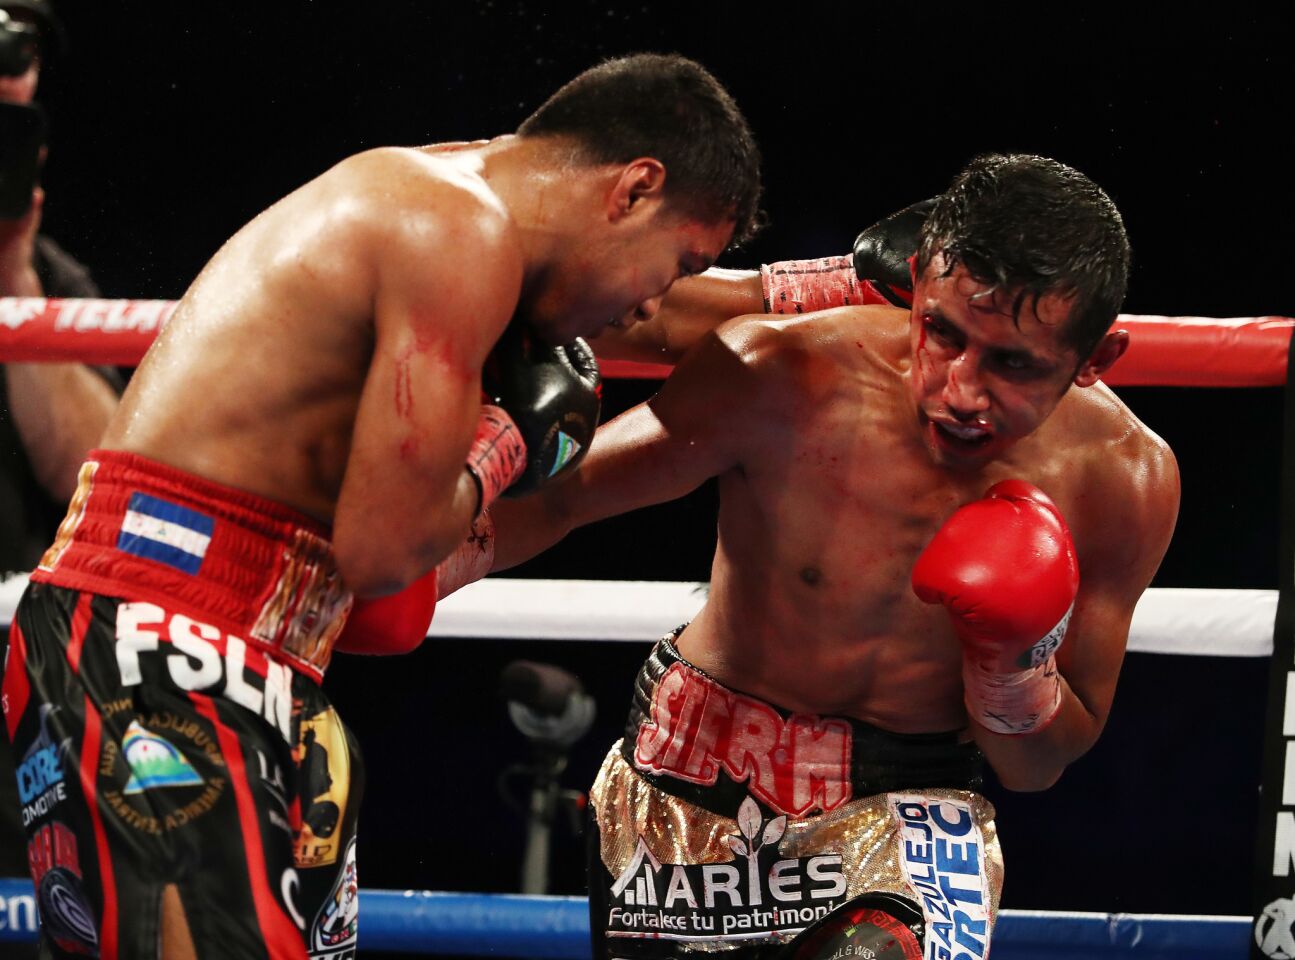 LAS VEGAS, NV - SEPTEMBER 15: Roman Gonzalez exchanges punches with Moises Fuentes during their super flyweight bout at T-Mobile Arena on September 15, 2018 in Las Vegas, Nevada. (Photo by Al Bello/Getty Images) ** OUTS - ELSENT, FPG, CM - OUTS * NM, PH, VA if sourced by CT, LA or MoD **